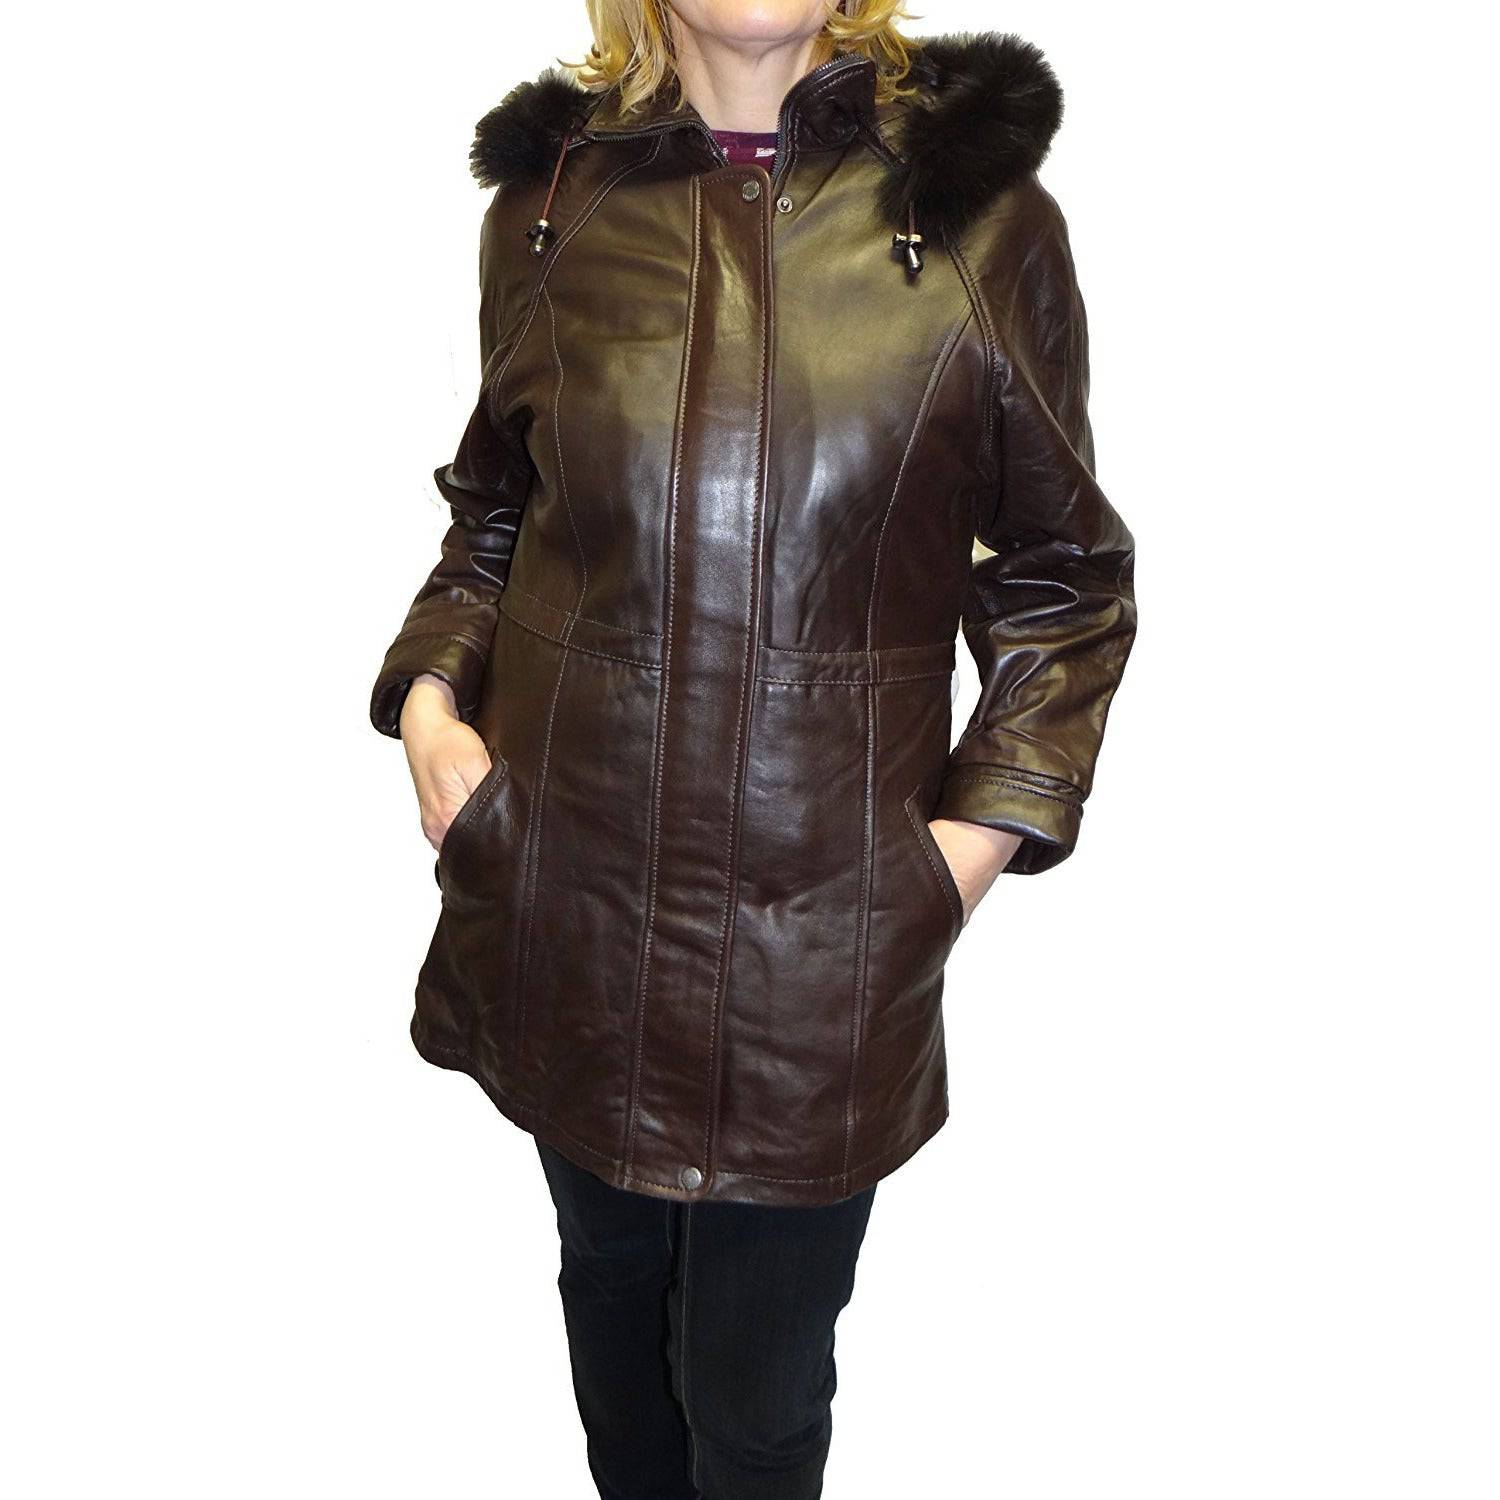 Womens Black Leather Jacket With Removable Hood